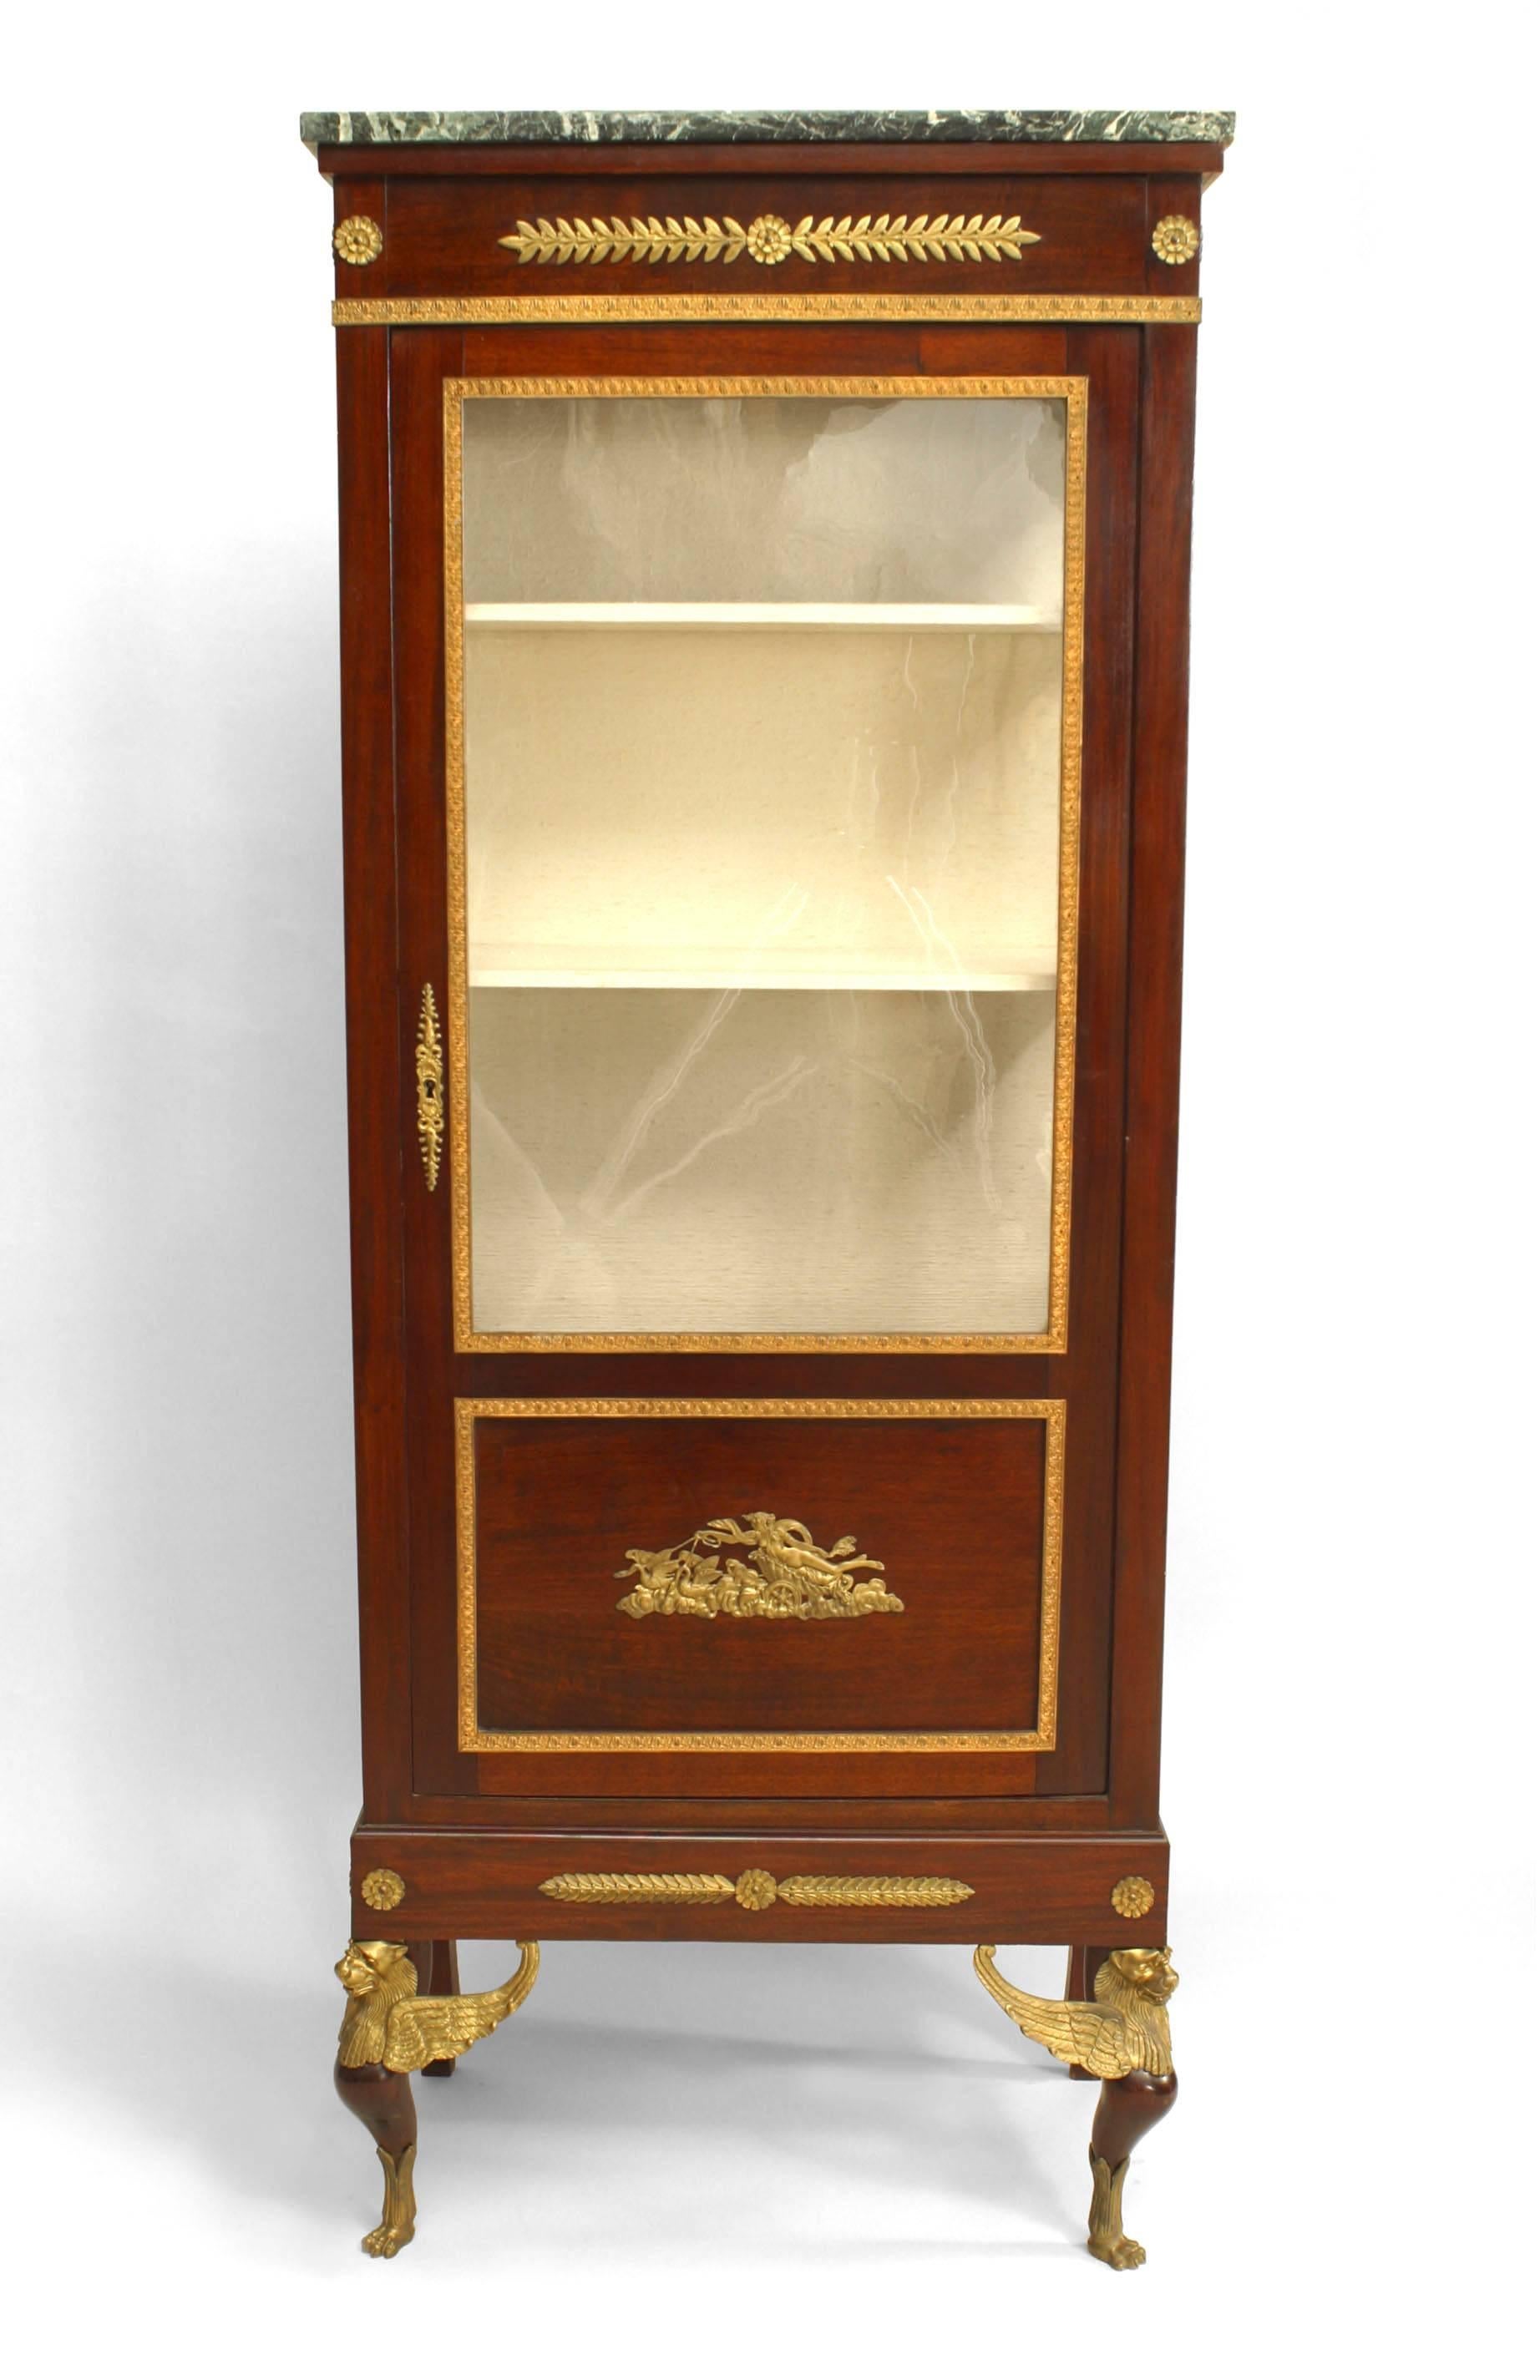 French Empire-style (19th Century) mahogany single door display/vitrine cabinet with gilt bronze trim and front sphinx form legs.
